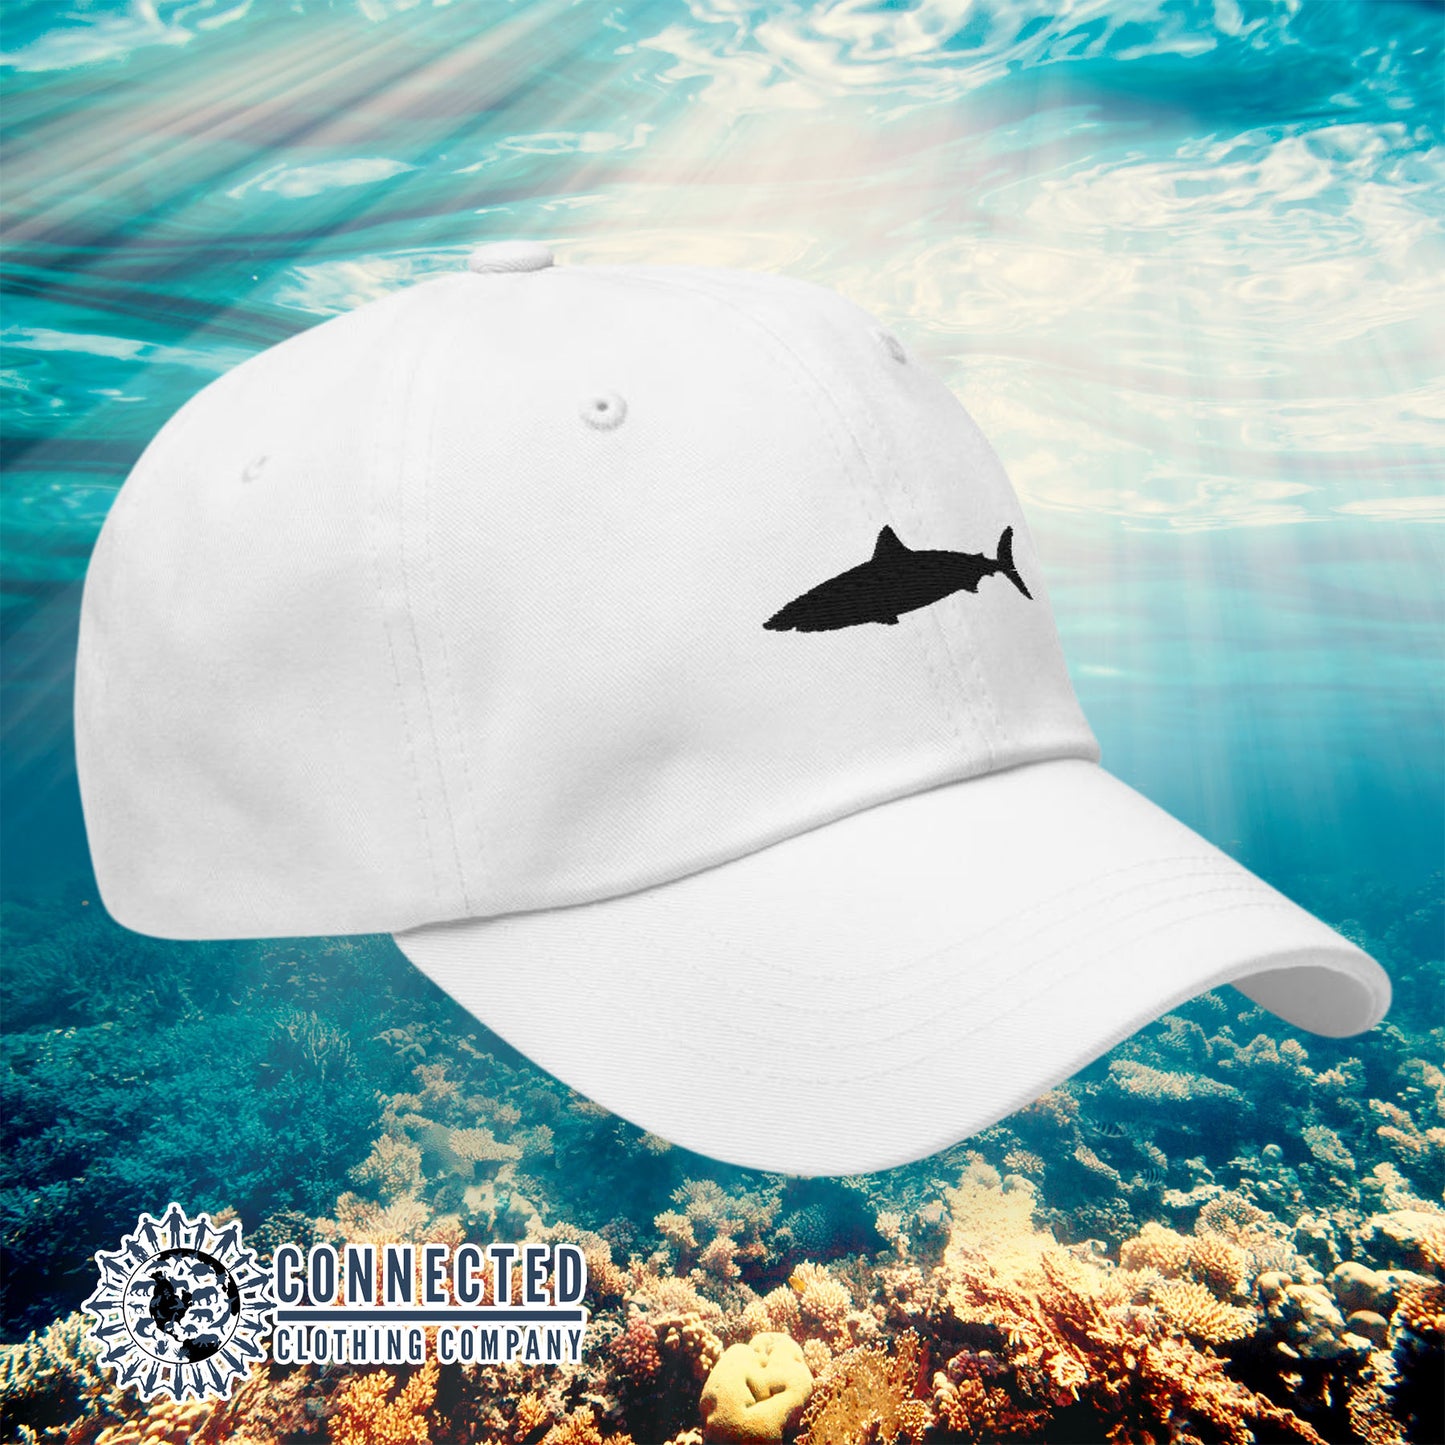 White Shark Cotton Cap - Connected Clothing Company - Ethical & Sustainable Clothing That Gives Back - 10% donated to Oceana shark conservation